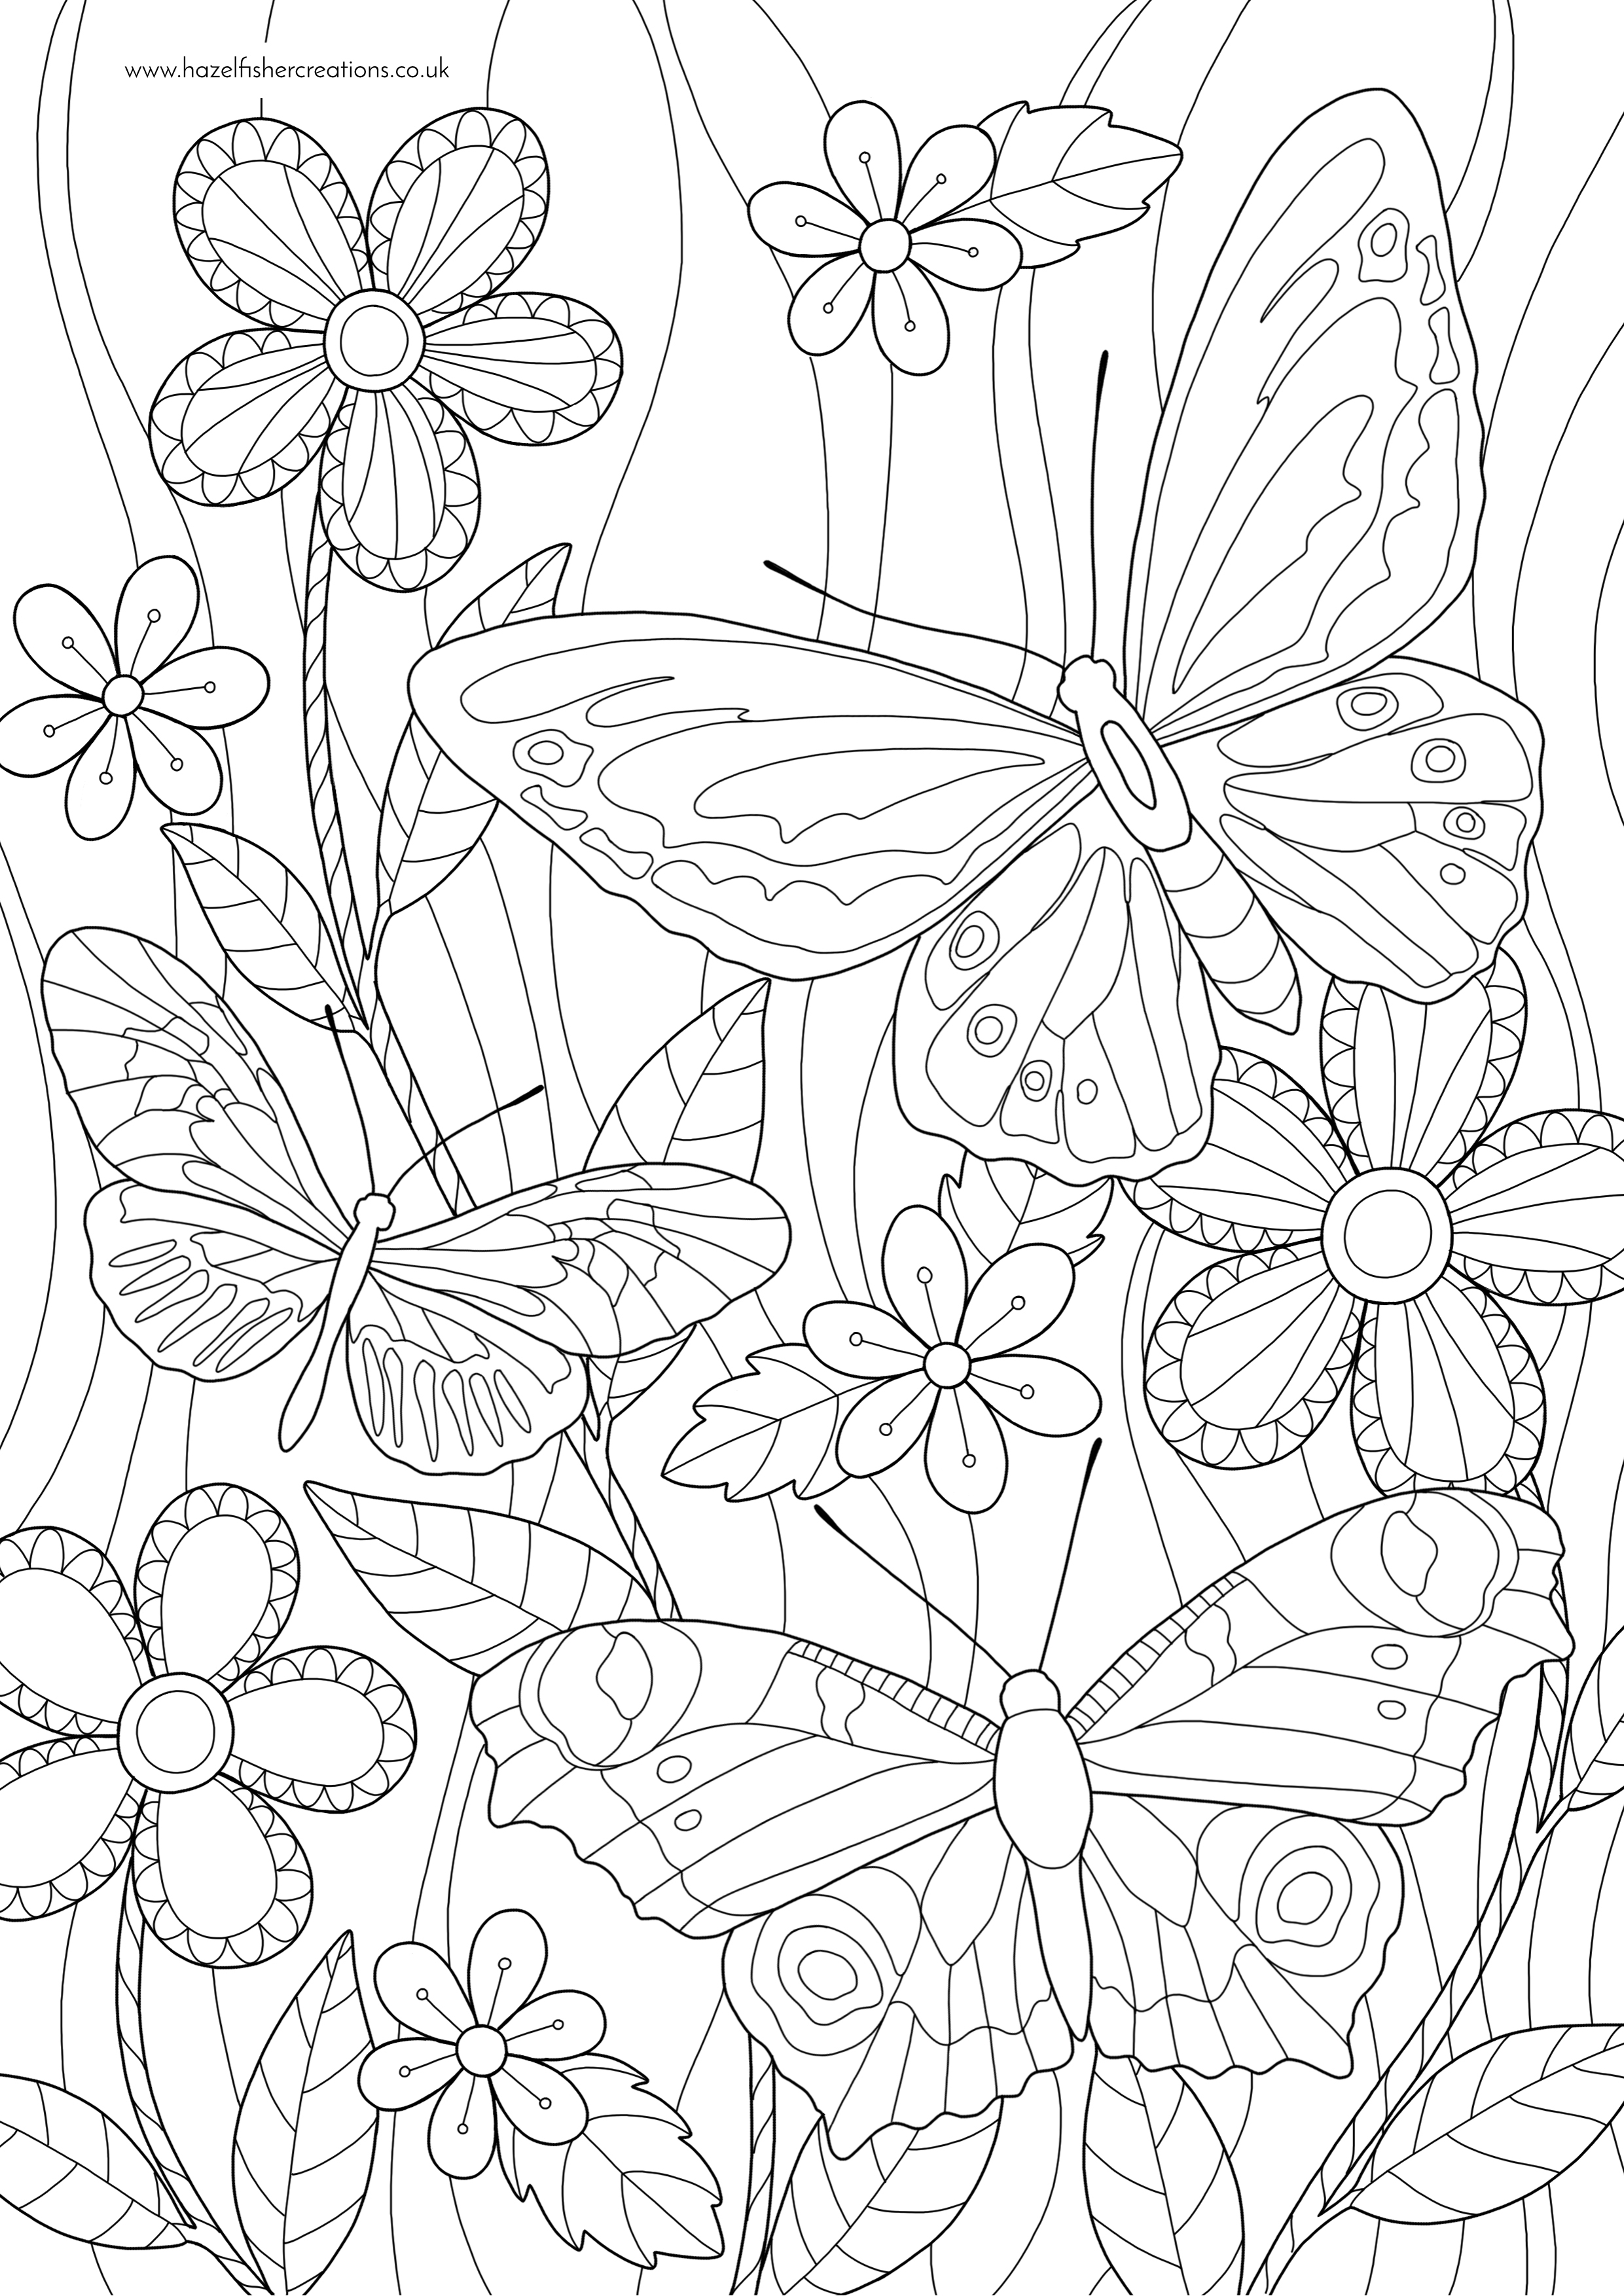 Butterfly Colouring In Activity Sheet  image